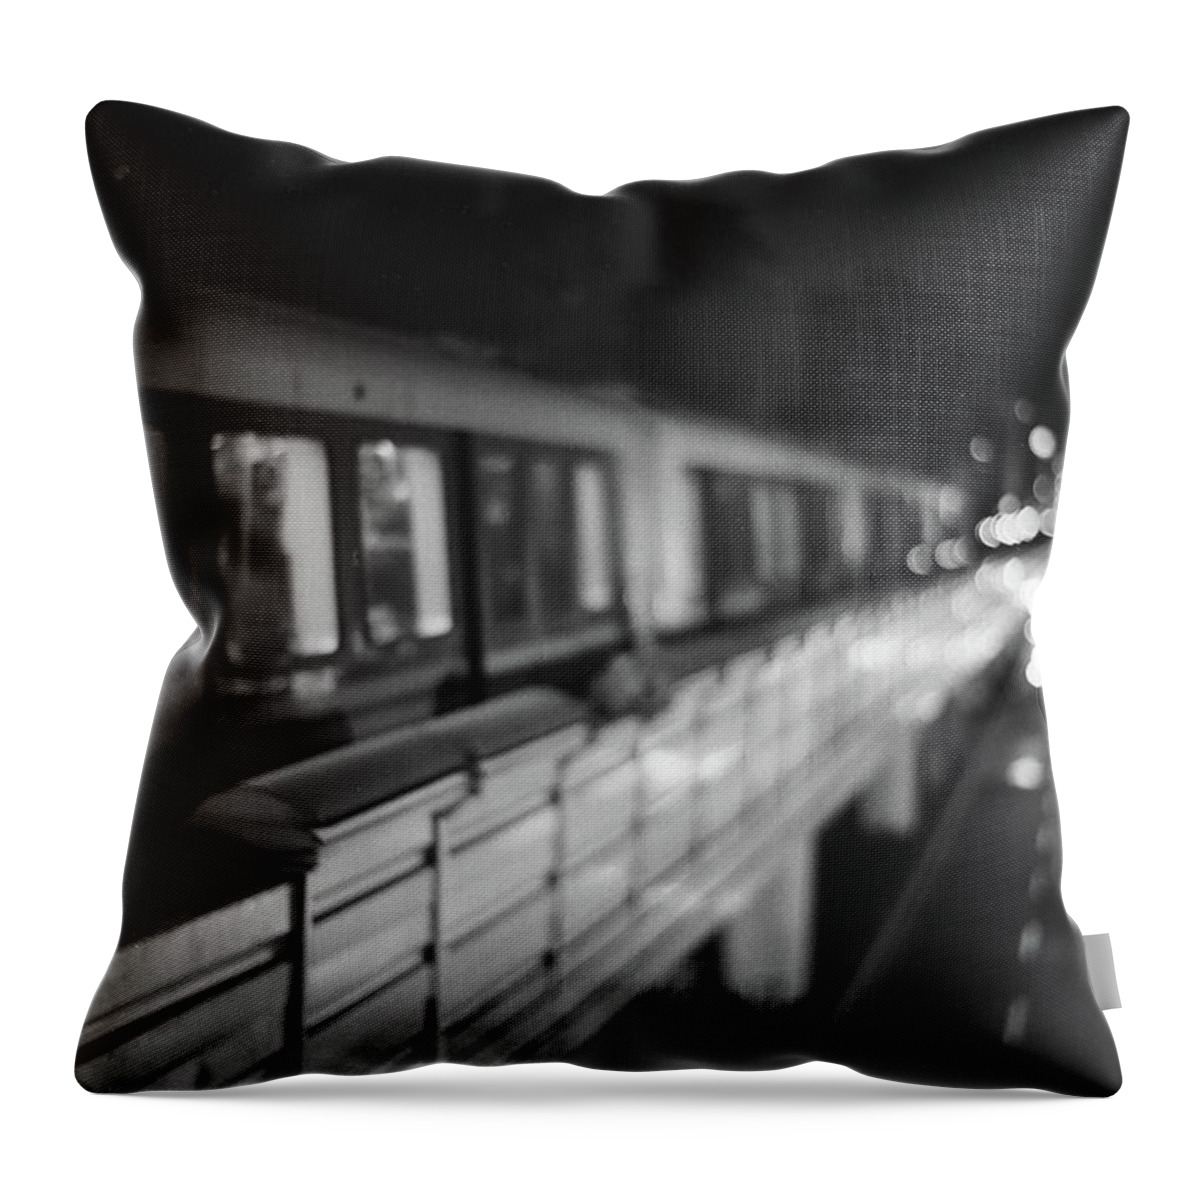 Taiwan Throw Pillow featuring the photograph Night Train by Foto By Chandler Chou